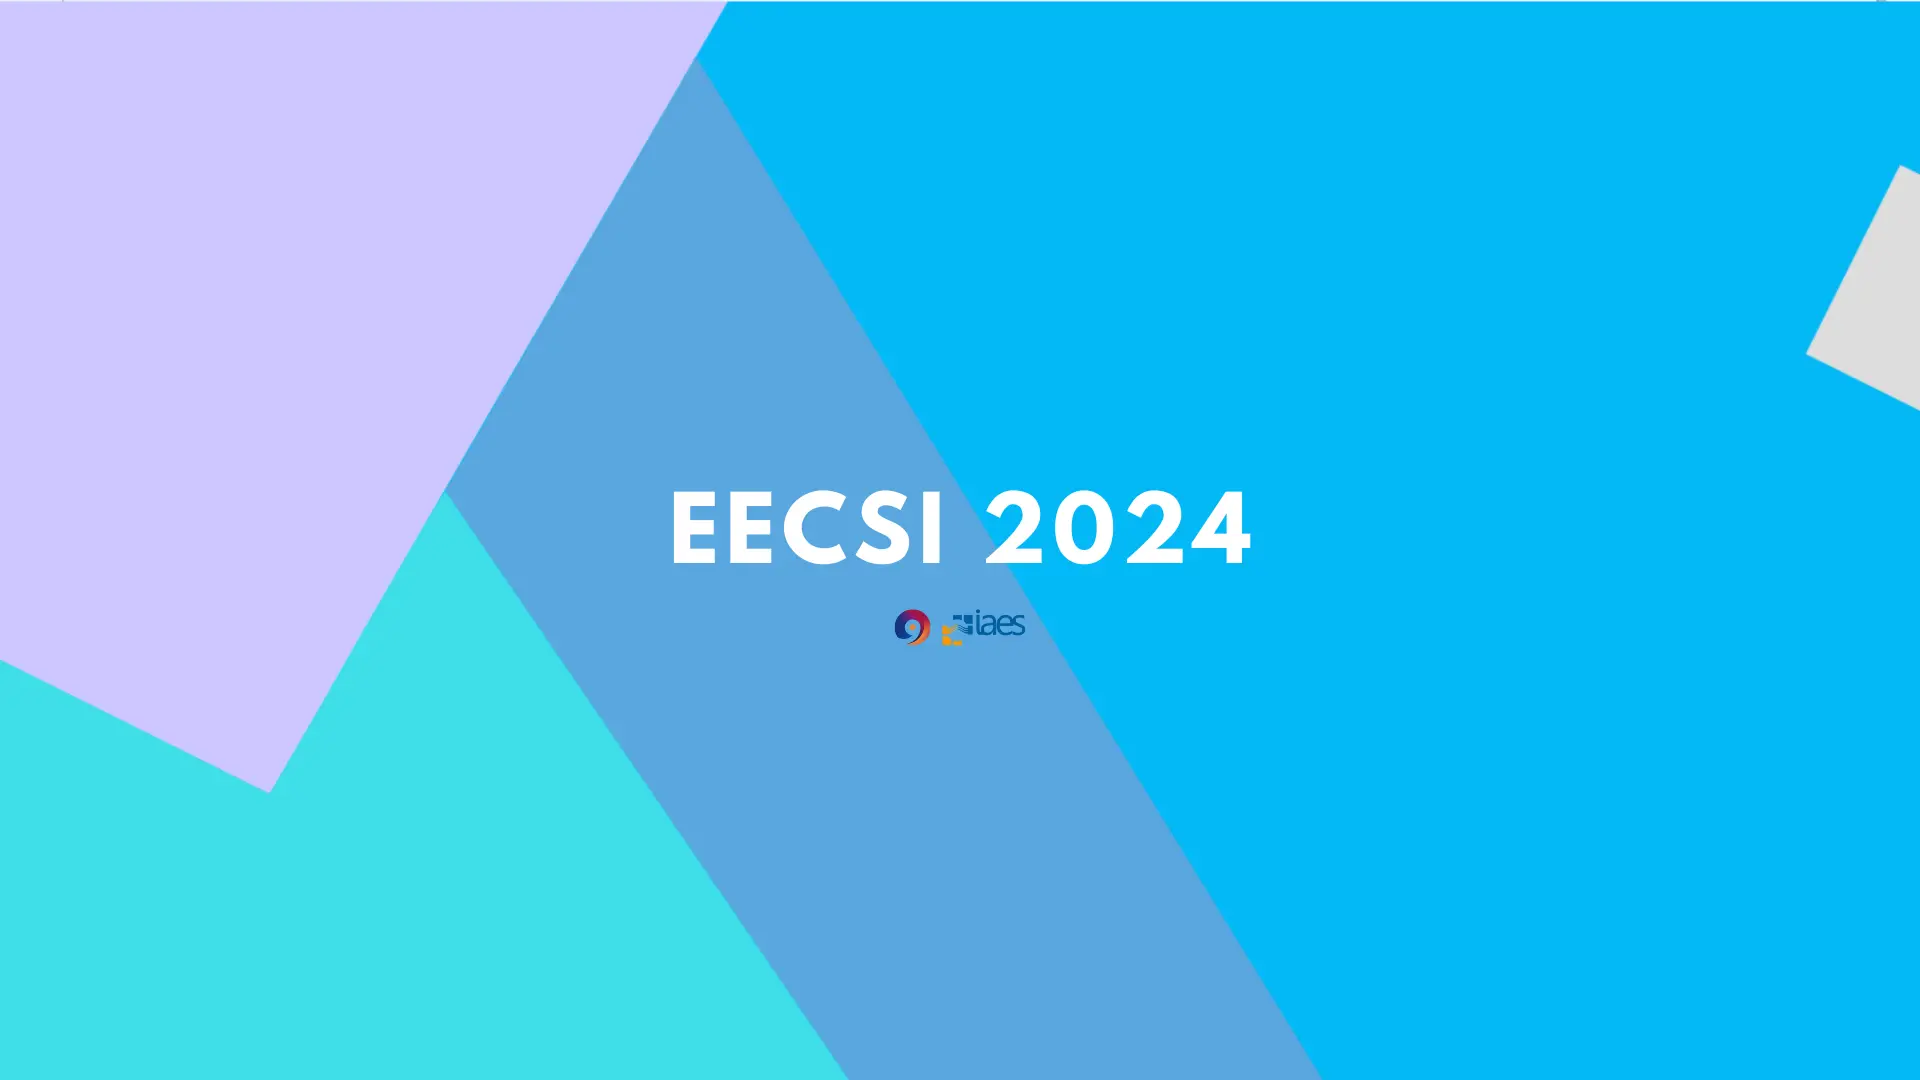 11th International Conference on Electrical Engineering, Computer Science and Informatics (EECSI 2024) 